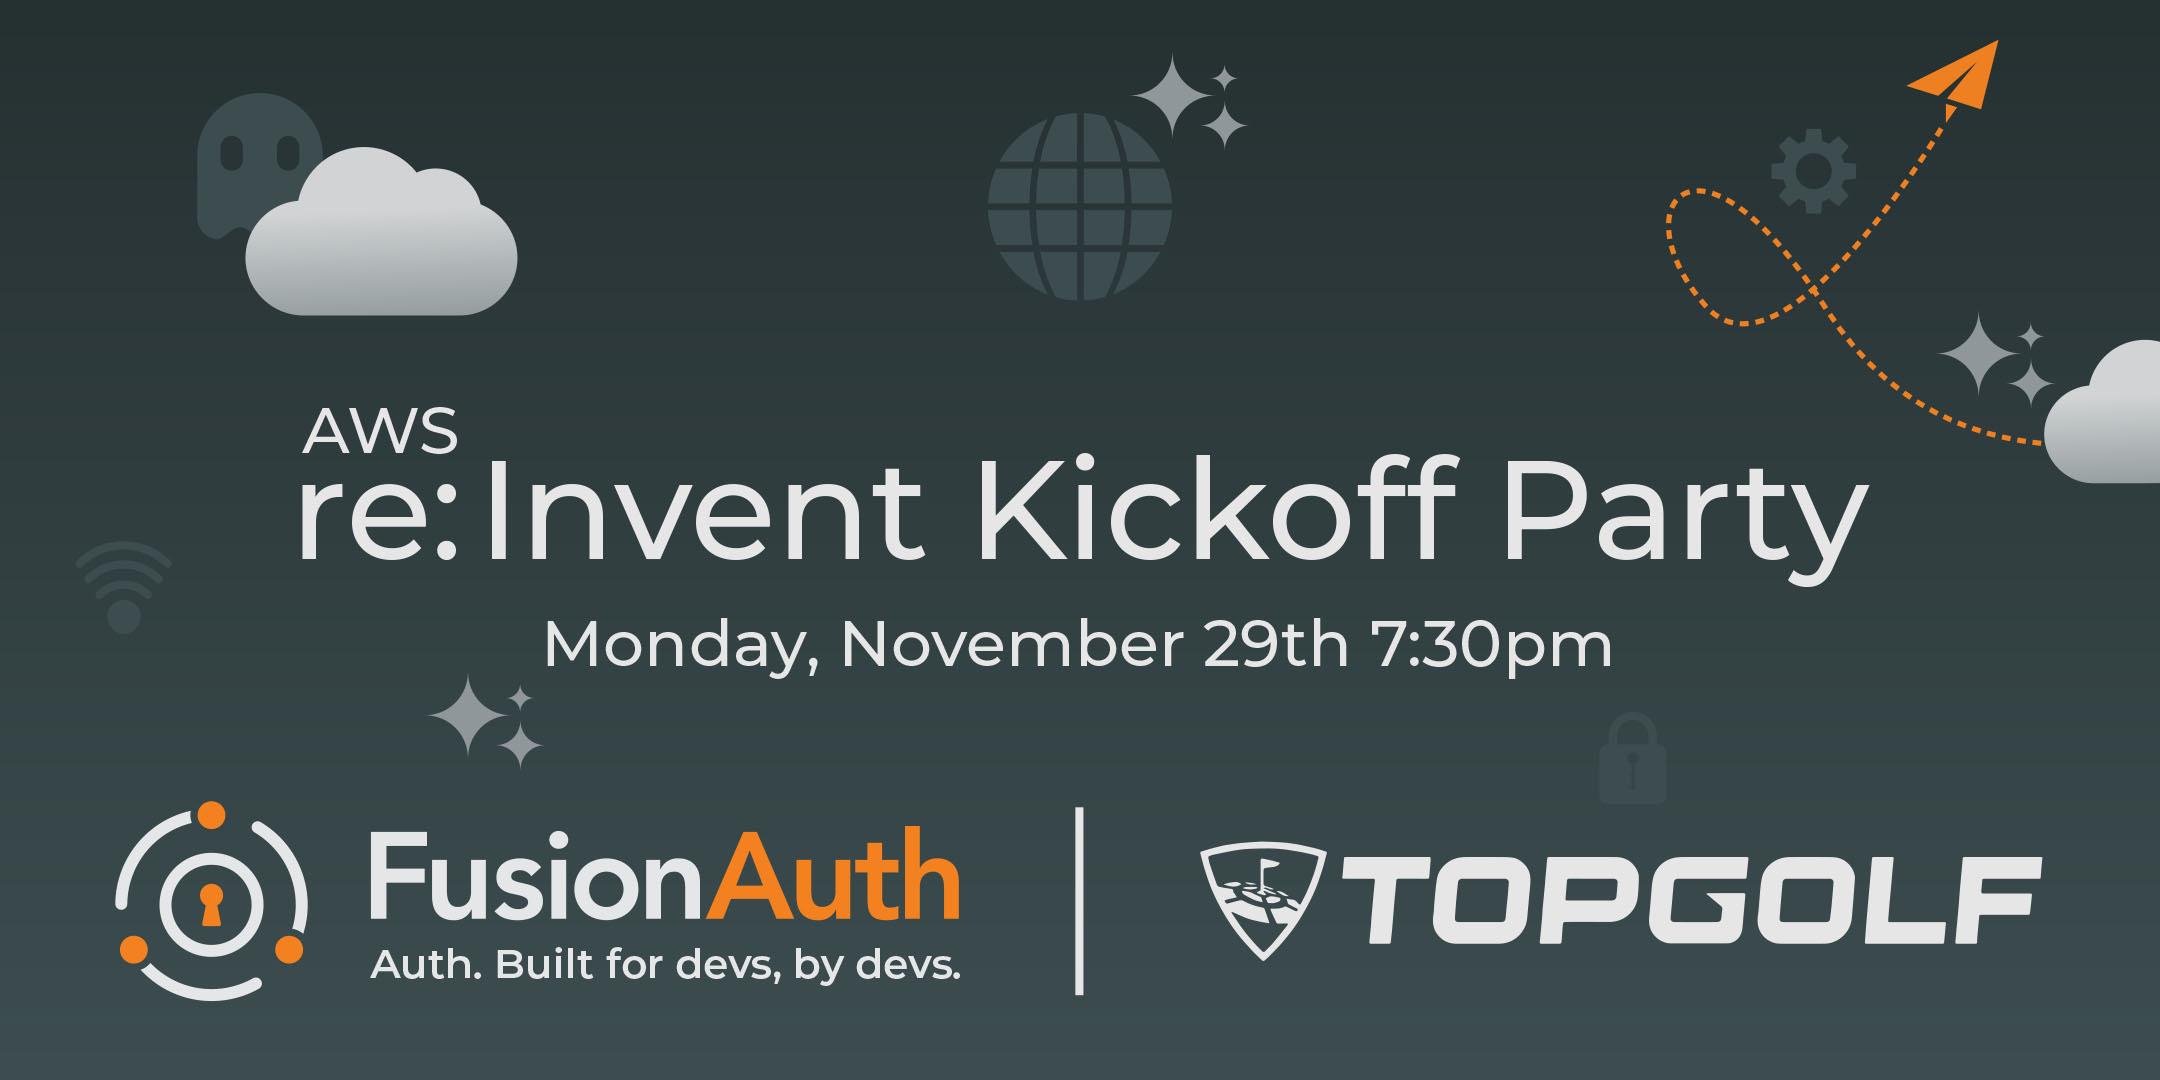 AWS re:Invent Kickoff Party with FusionAuth at TopGolf